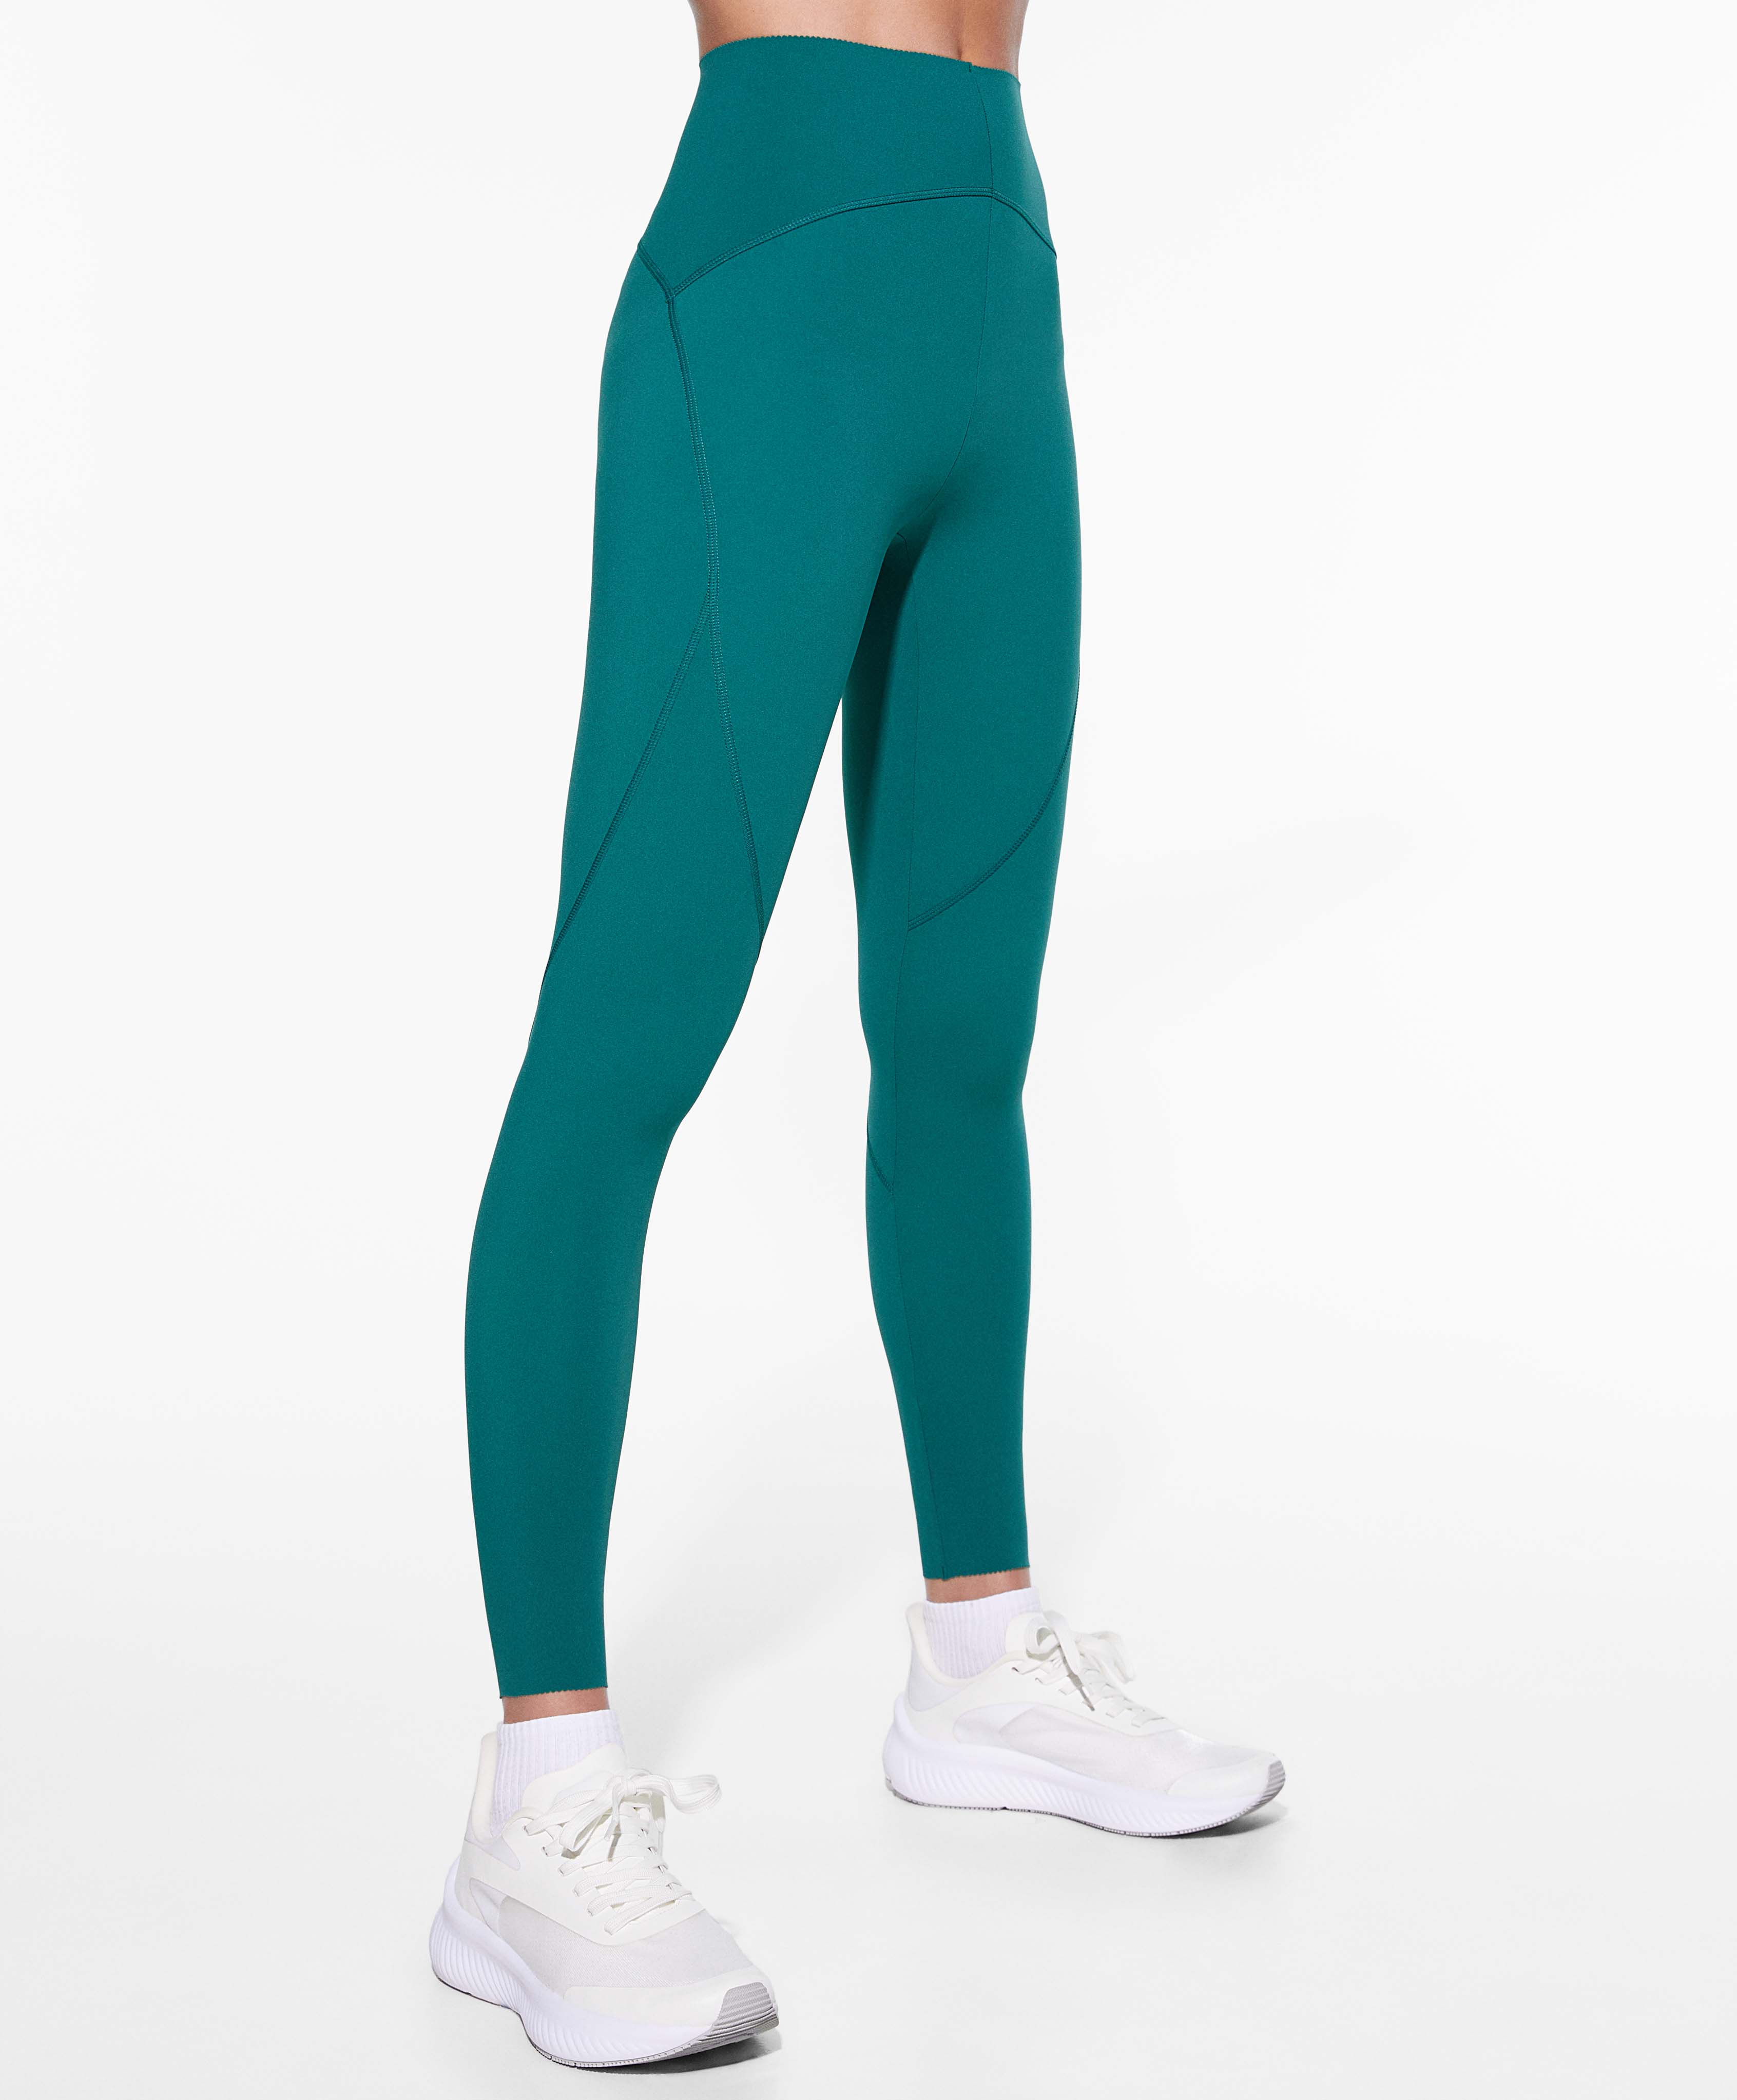 LOGO Layers by Lori Goldstein Regular Knit Pull-On Ankle Leggings - QVC.com